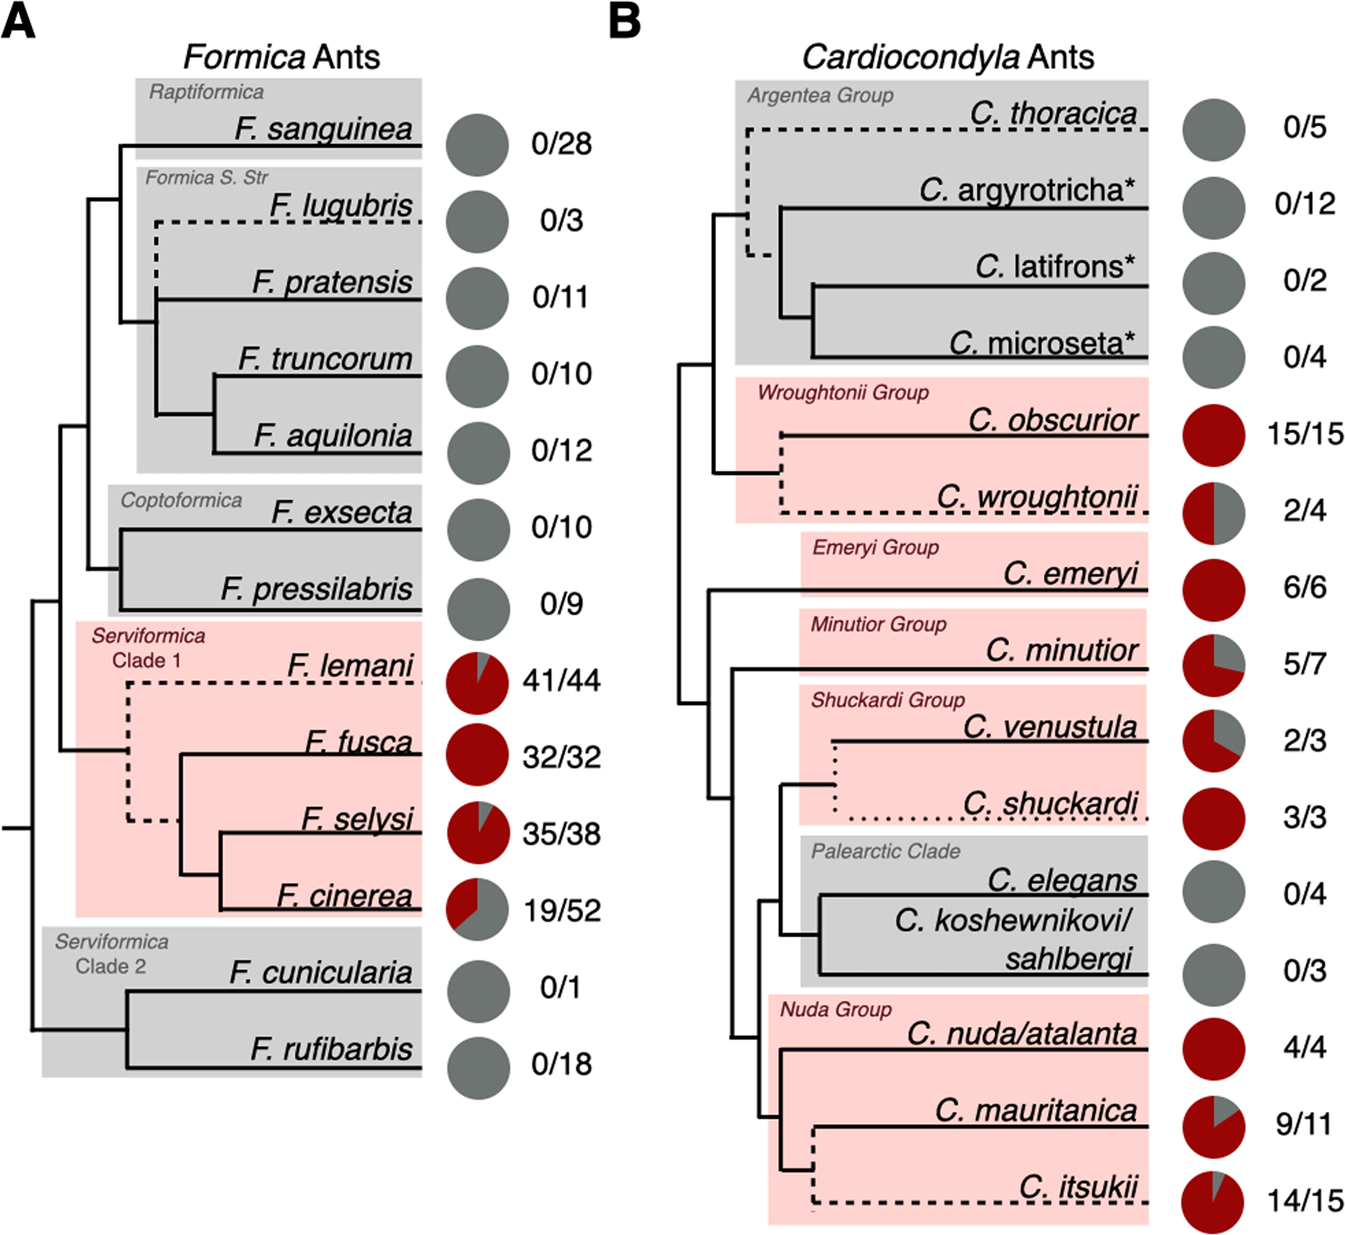 Phylogenetic distribution of symbionts in queens of Formica and Cardiocondyla ants